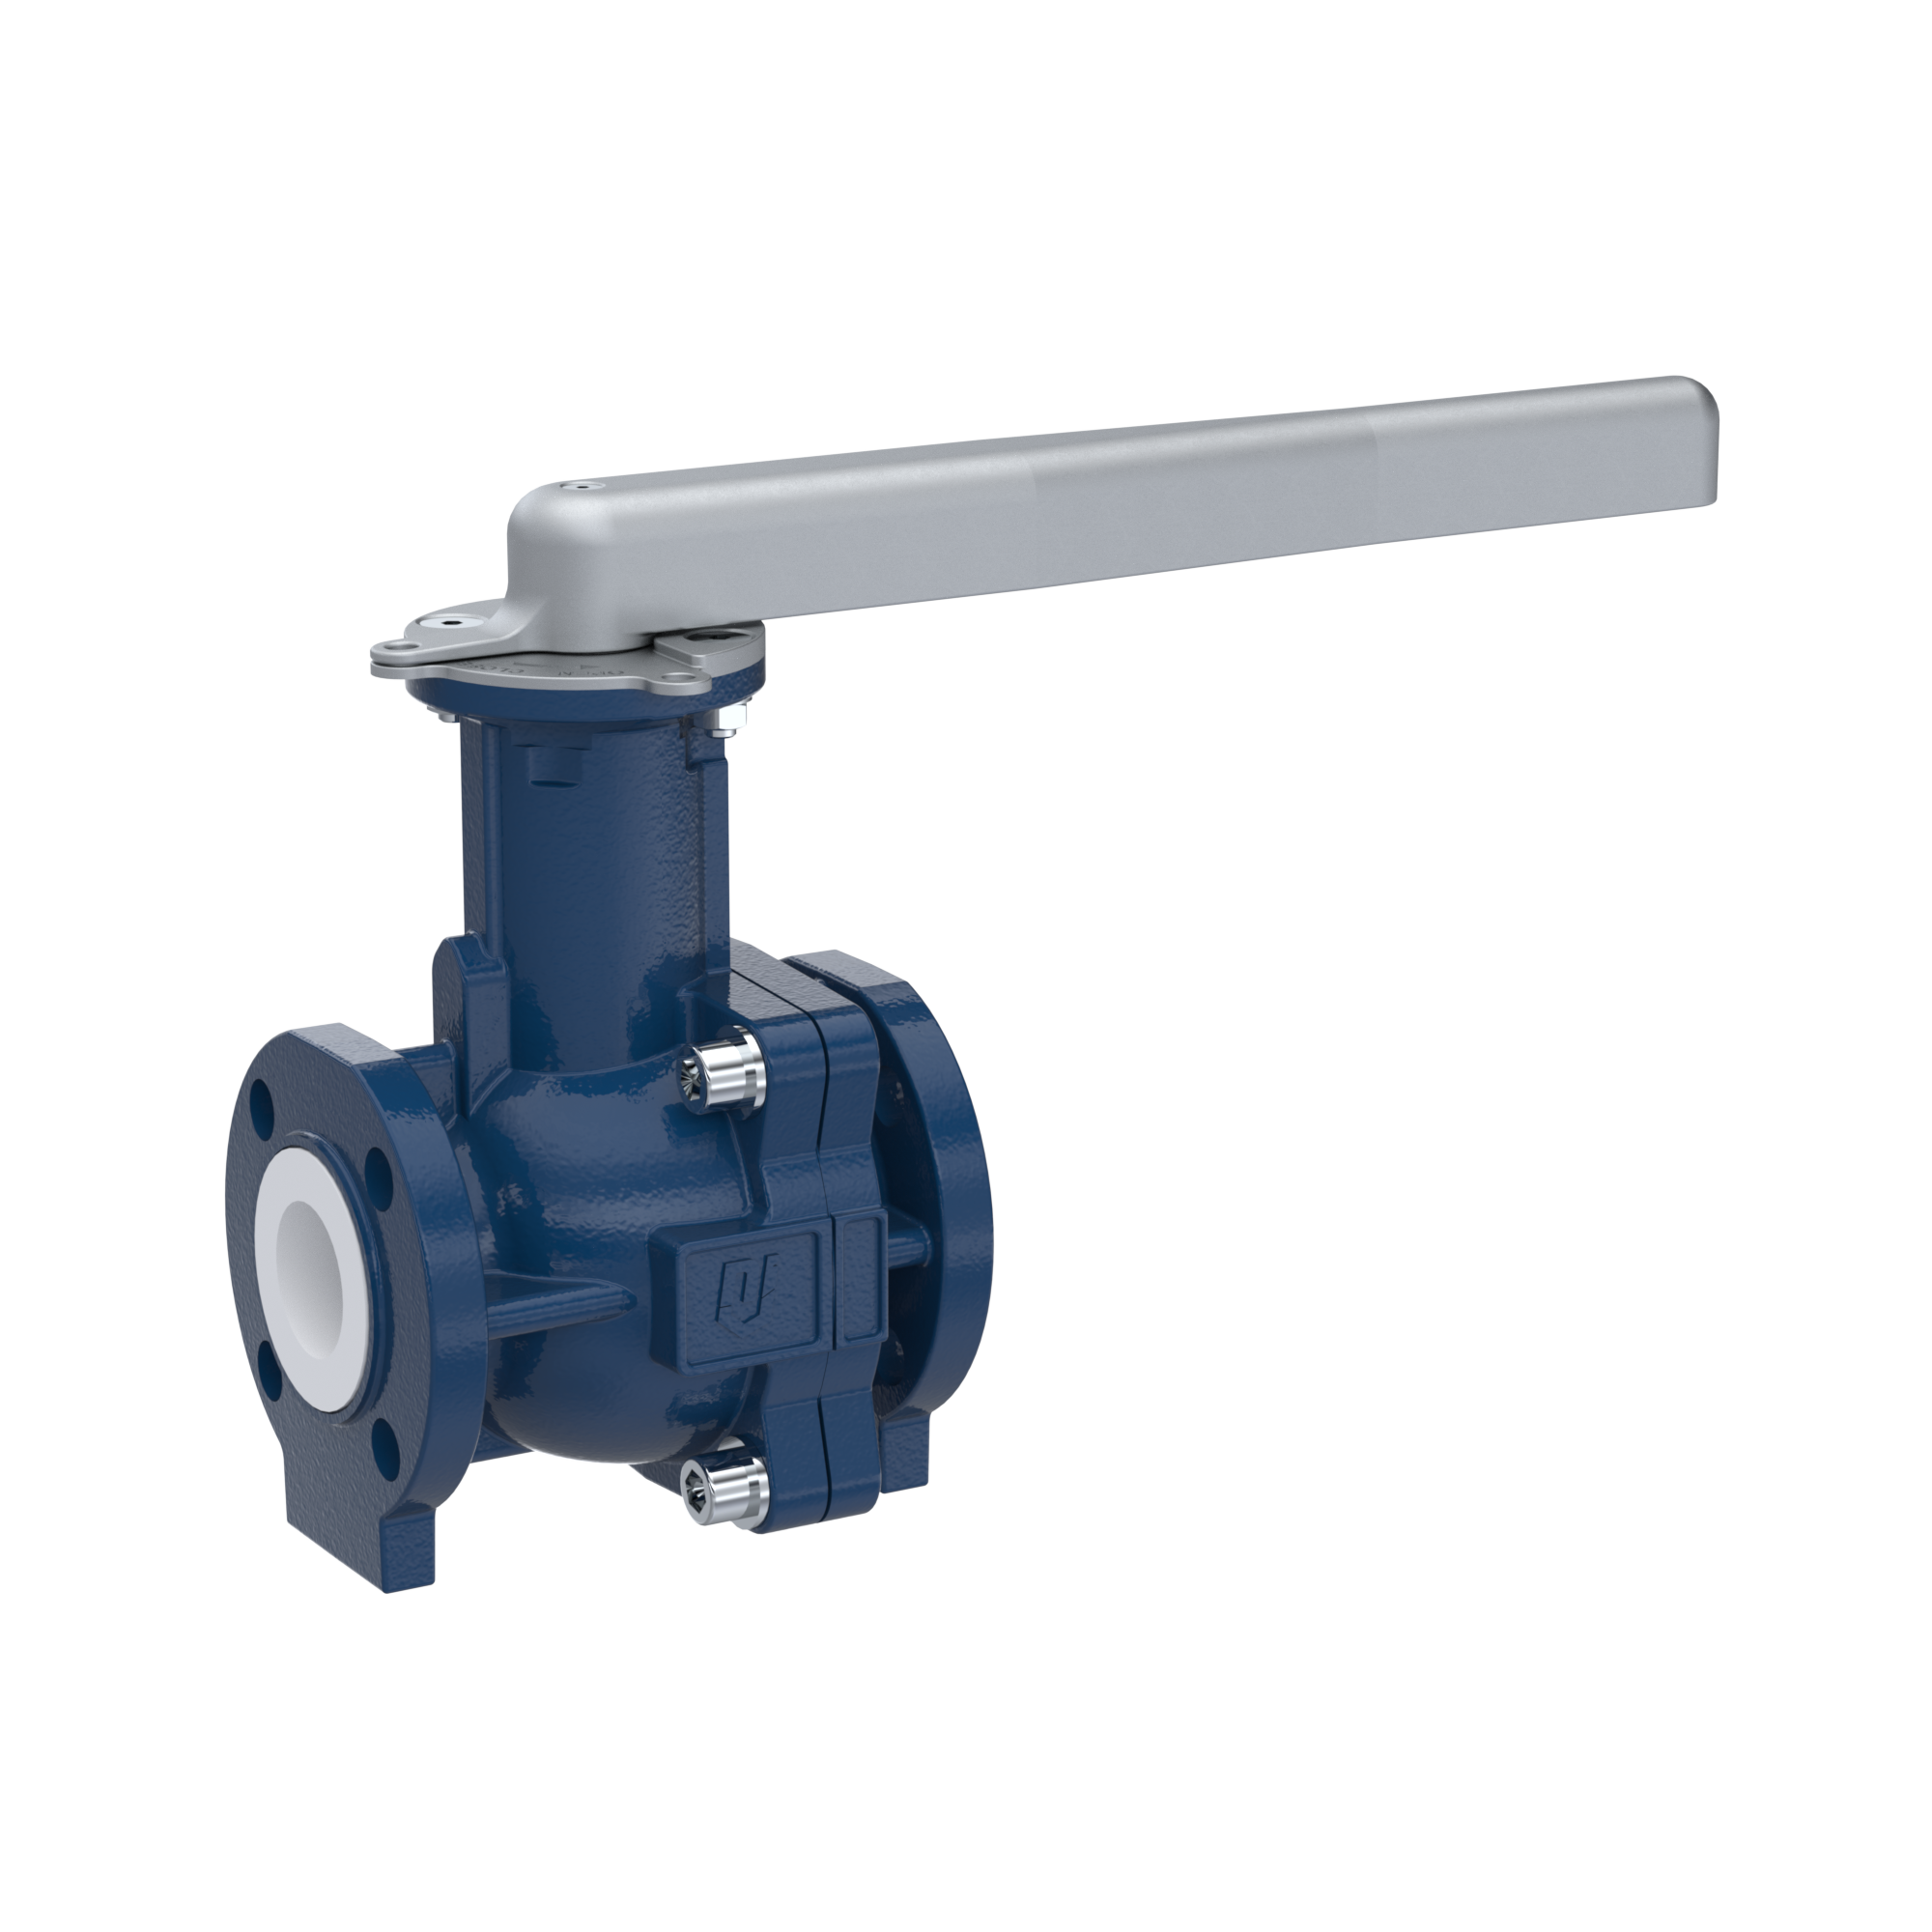 PFA-flange ball valve FK13 DN25 - 1" inch ANSI 150 made of spheroidal graphite cast iron with lever hand